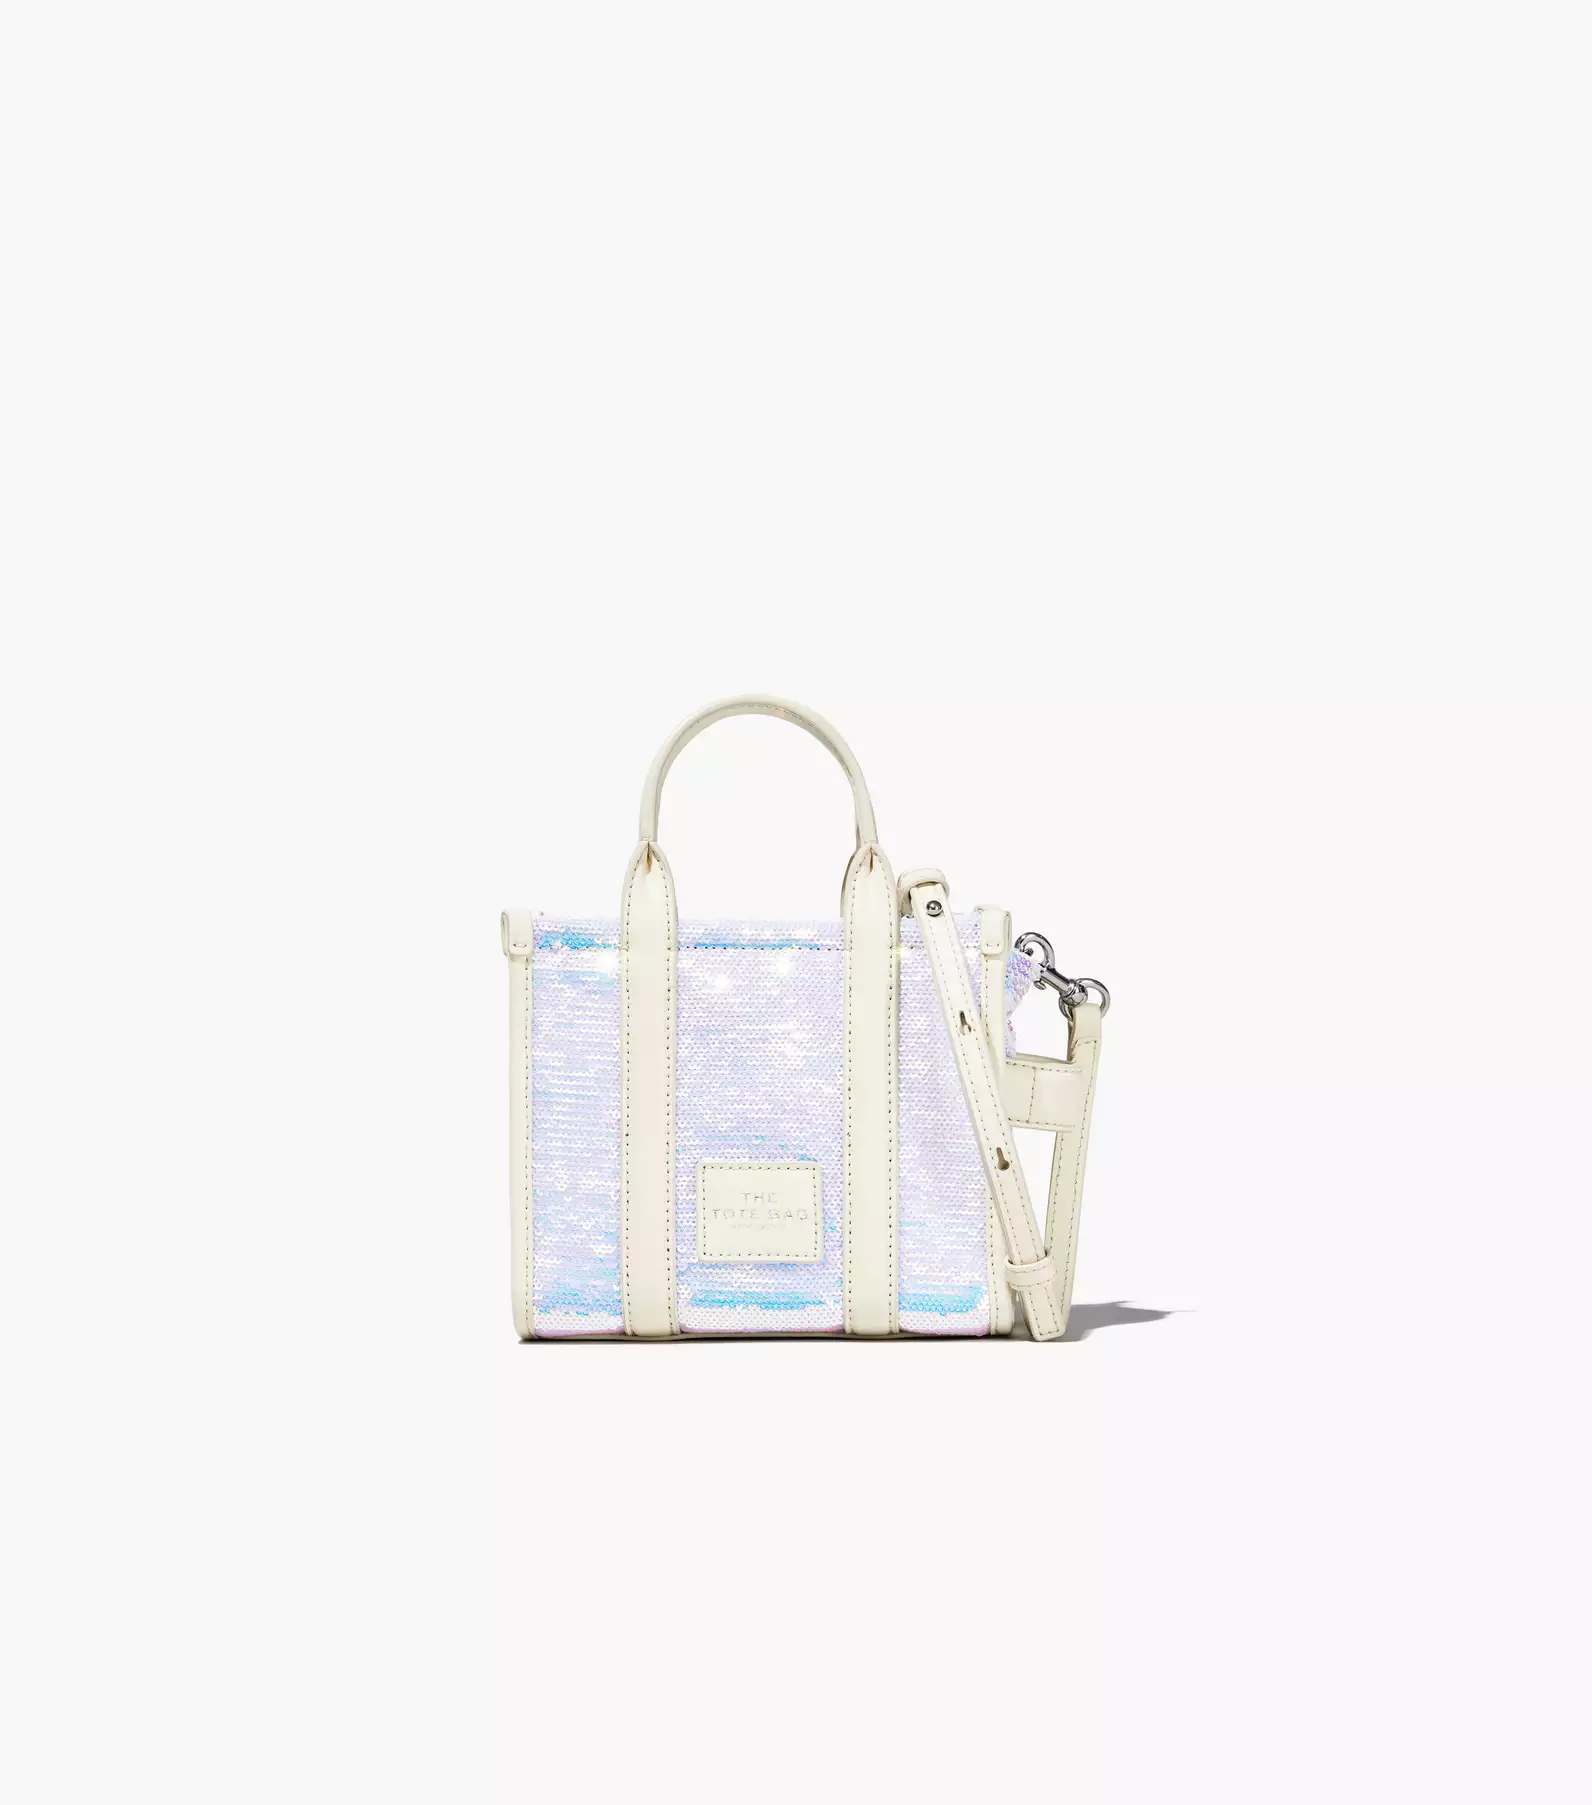 The Sequin Micro Tote Bag